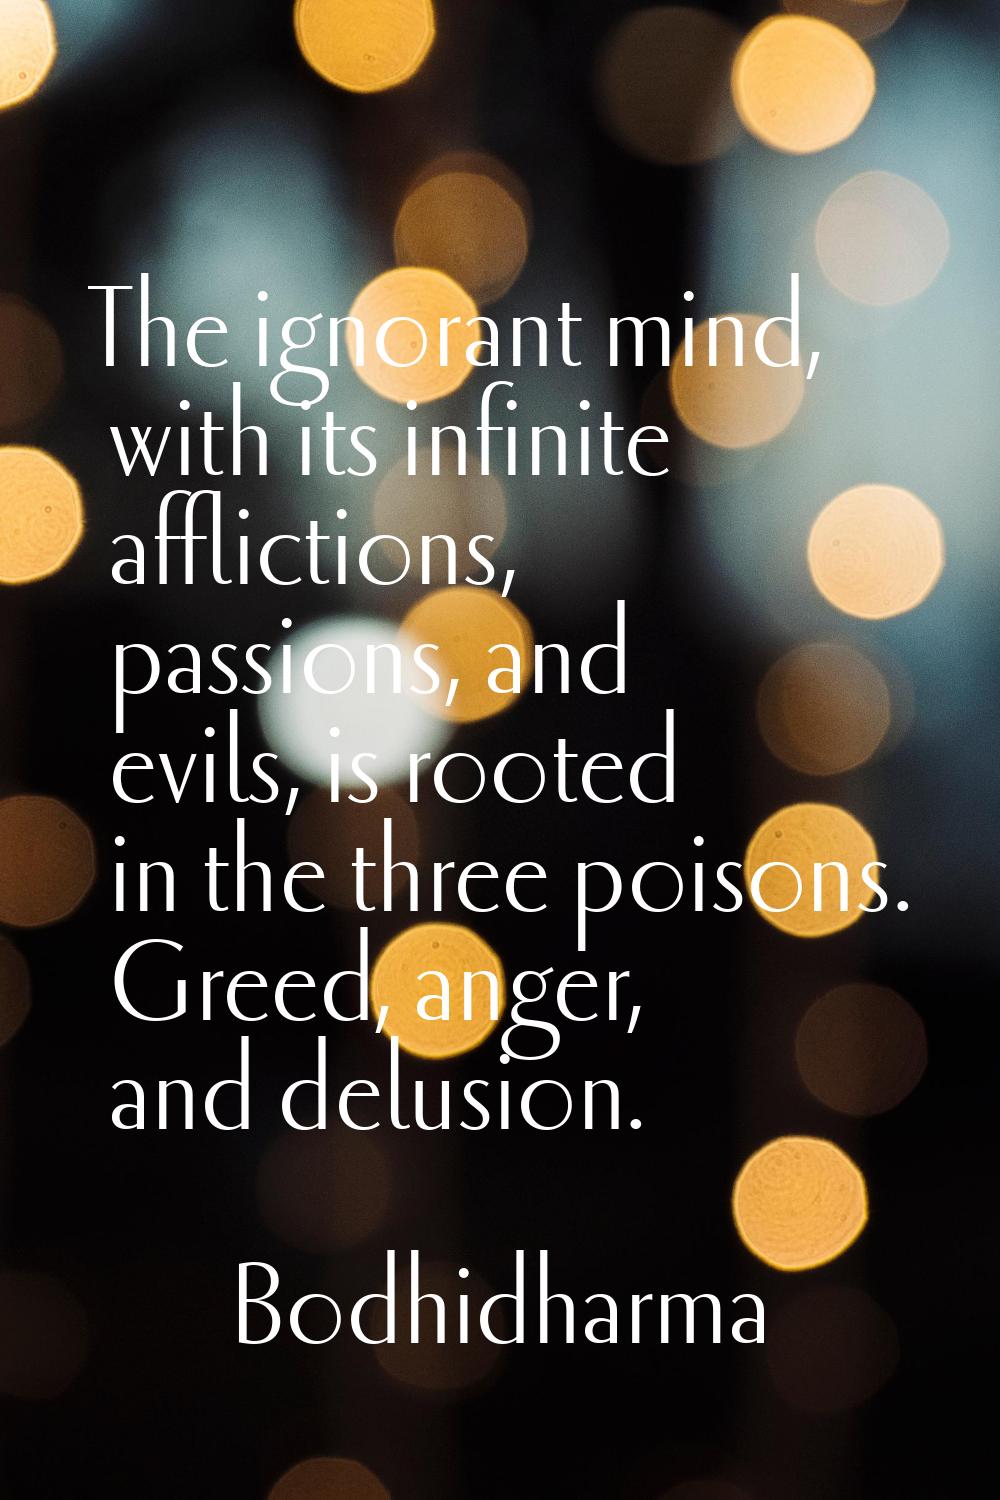 The ignorant mind, with its infinite afflictions, passions, and evils, is rooted in the three poiso